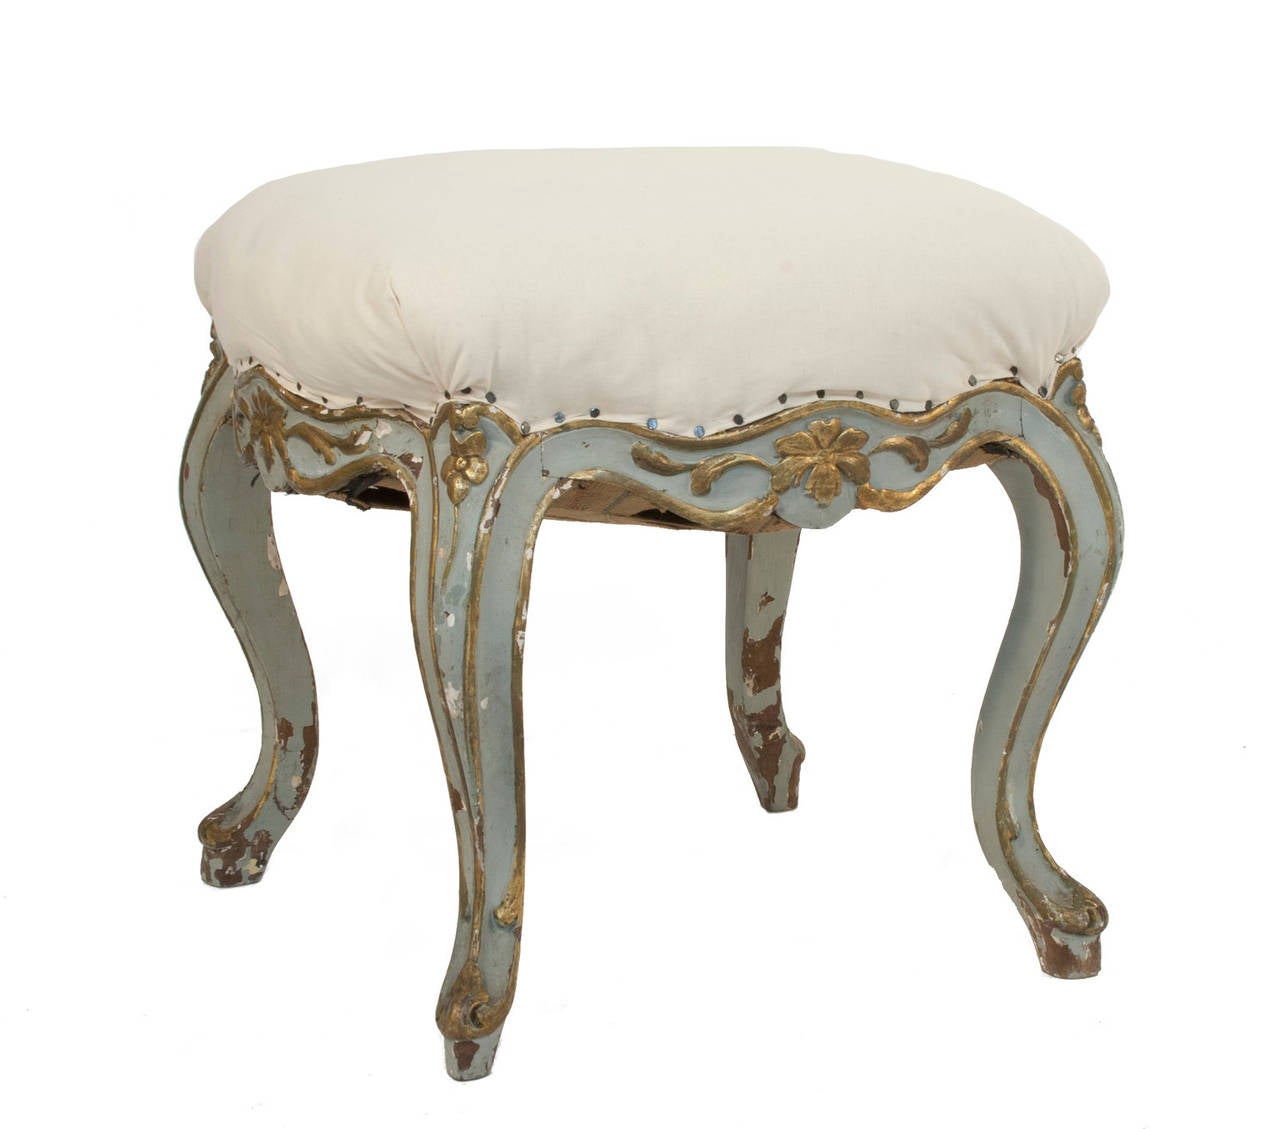 Rococo style stool in a worn pale blue and gilded patina.